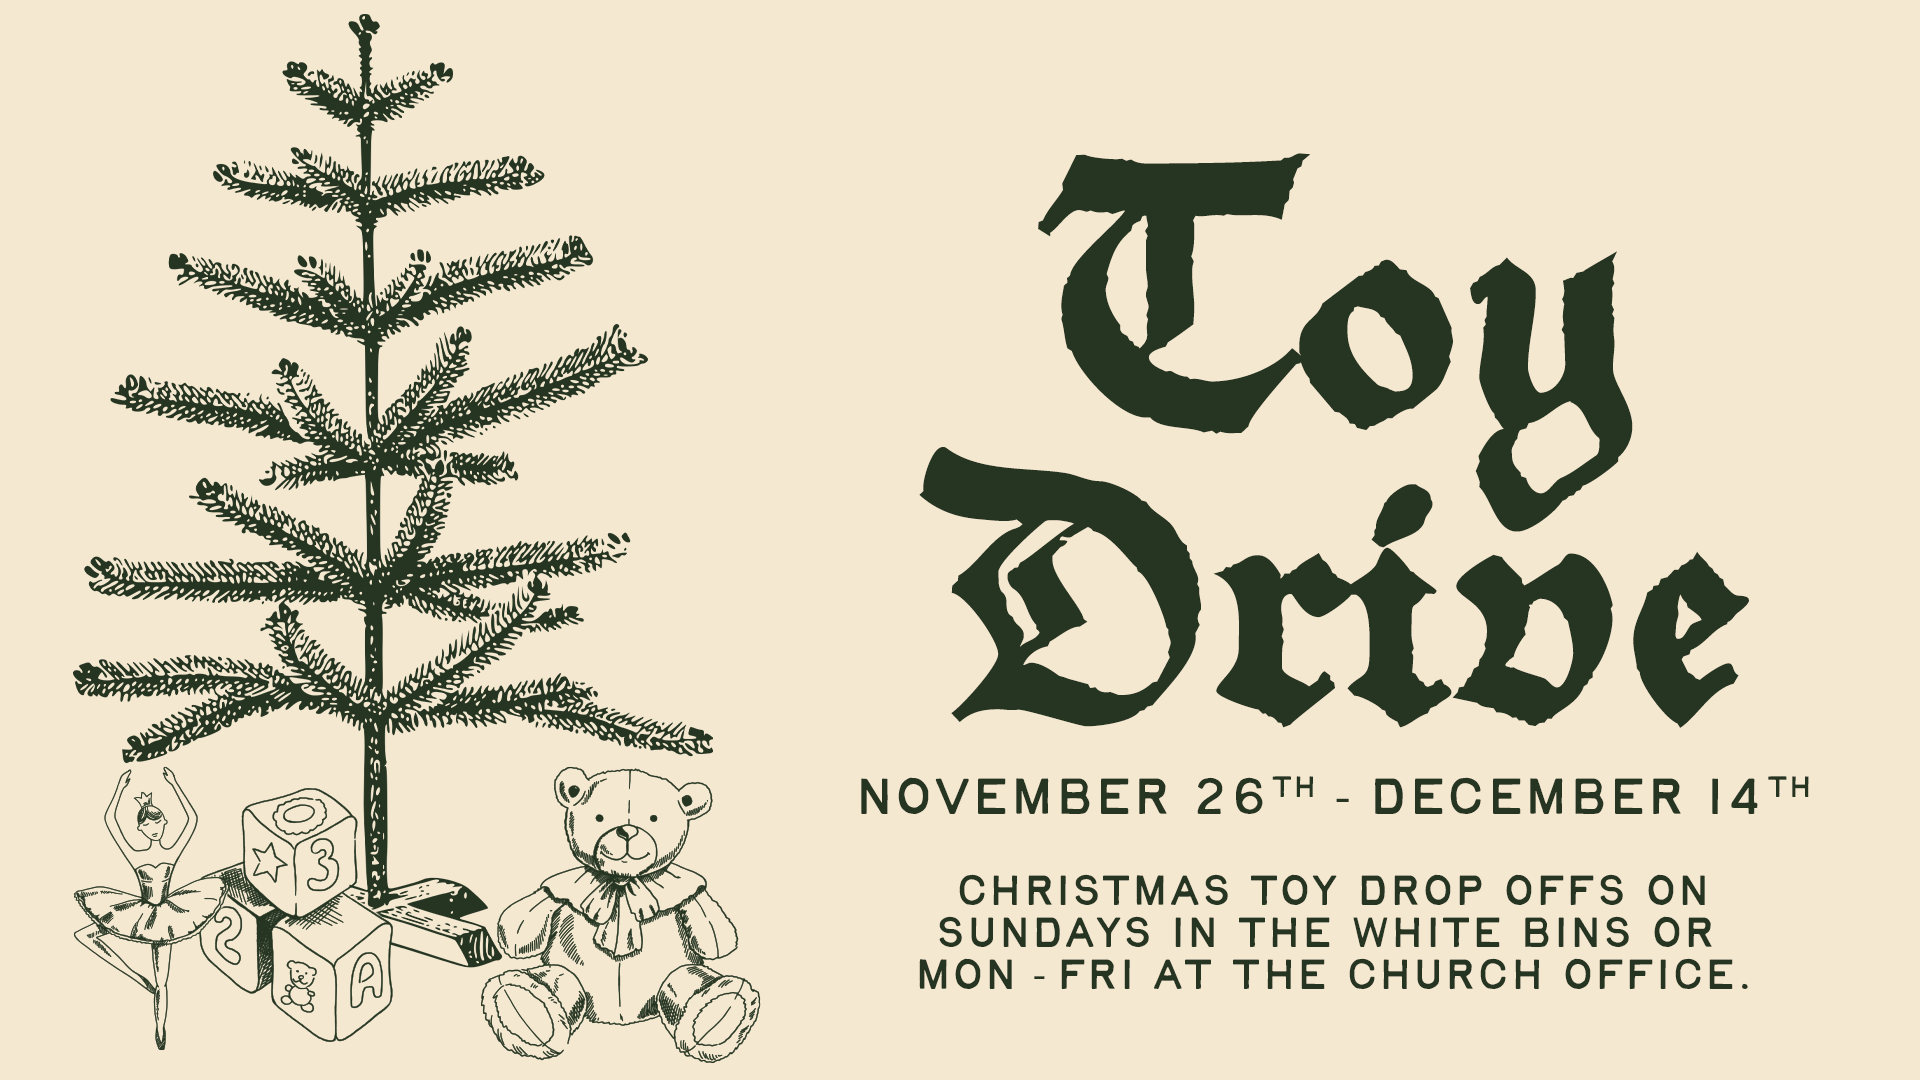 Toy & Gift Collection Drive at the Orange County campus